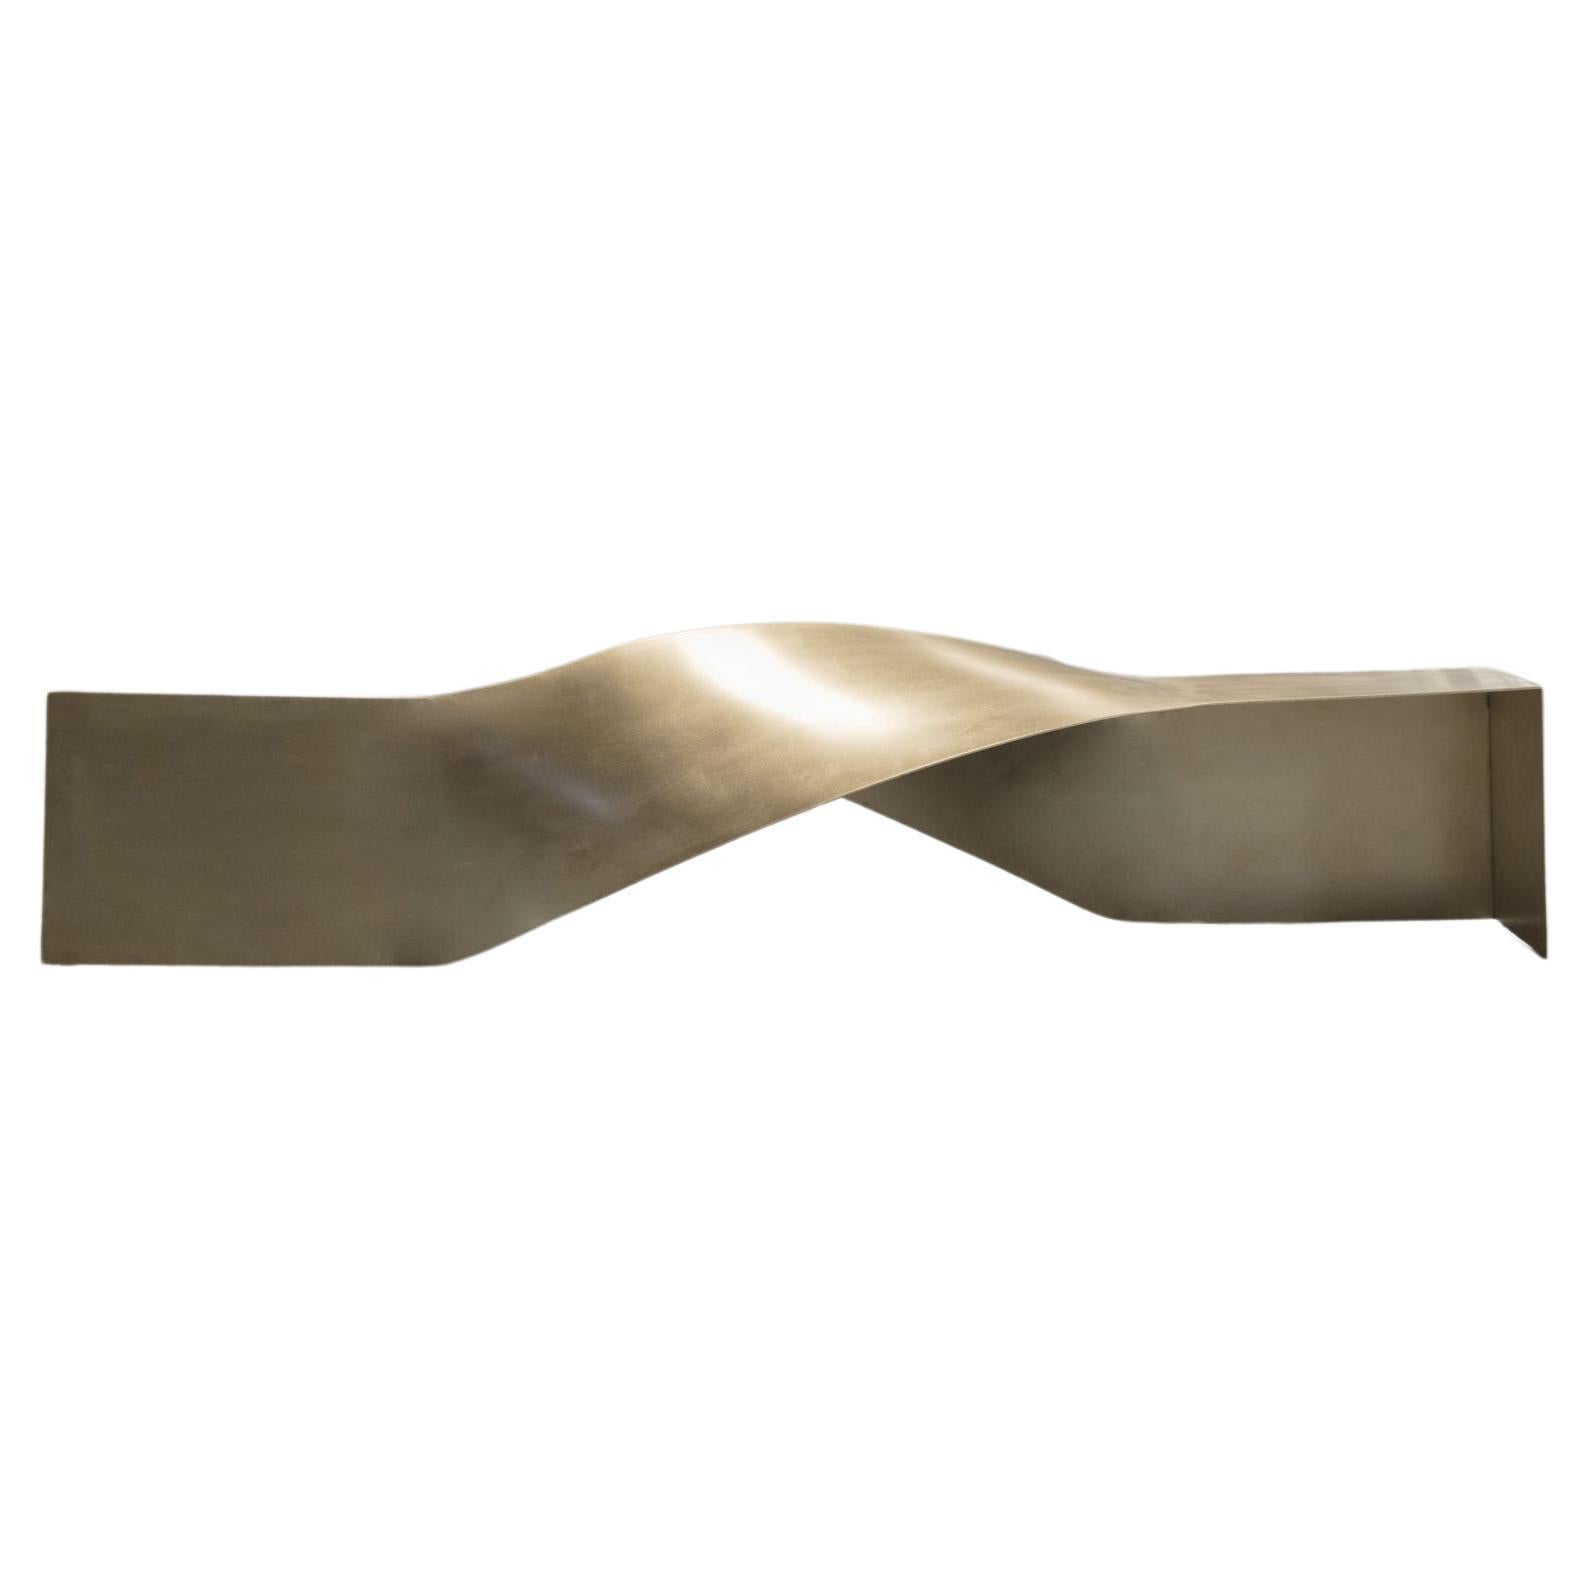 Soul Sculpture Bench in Brass Natural Gold Large by Veronica Mar